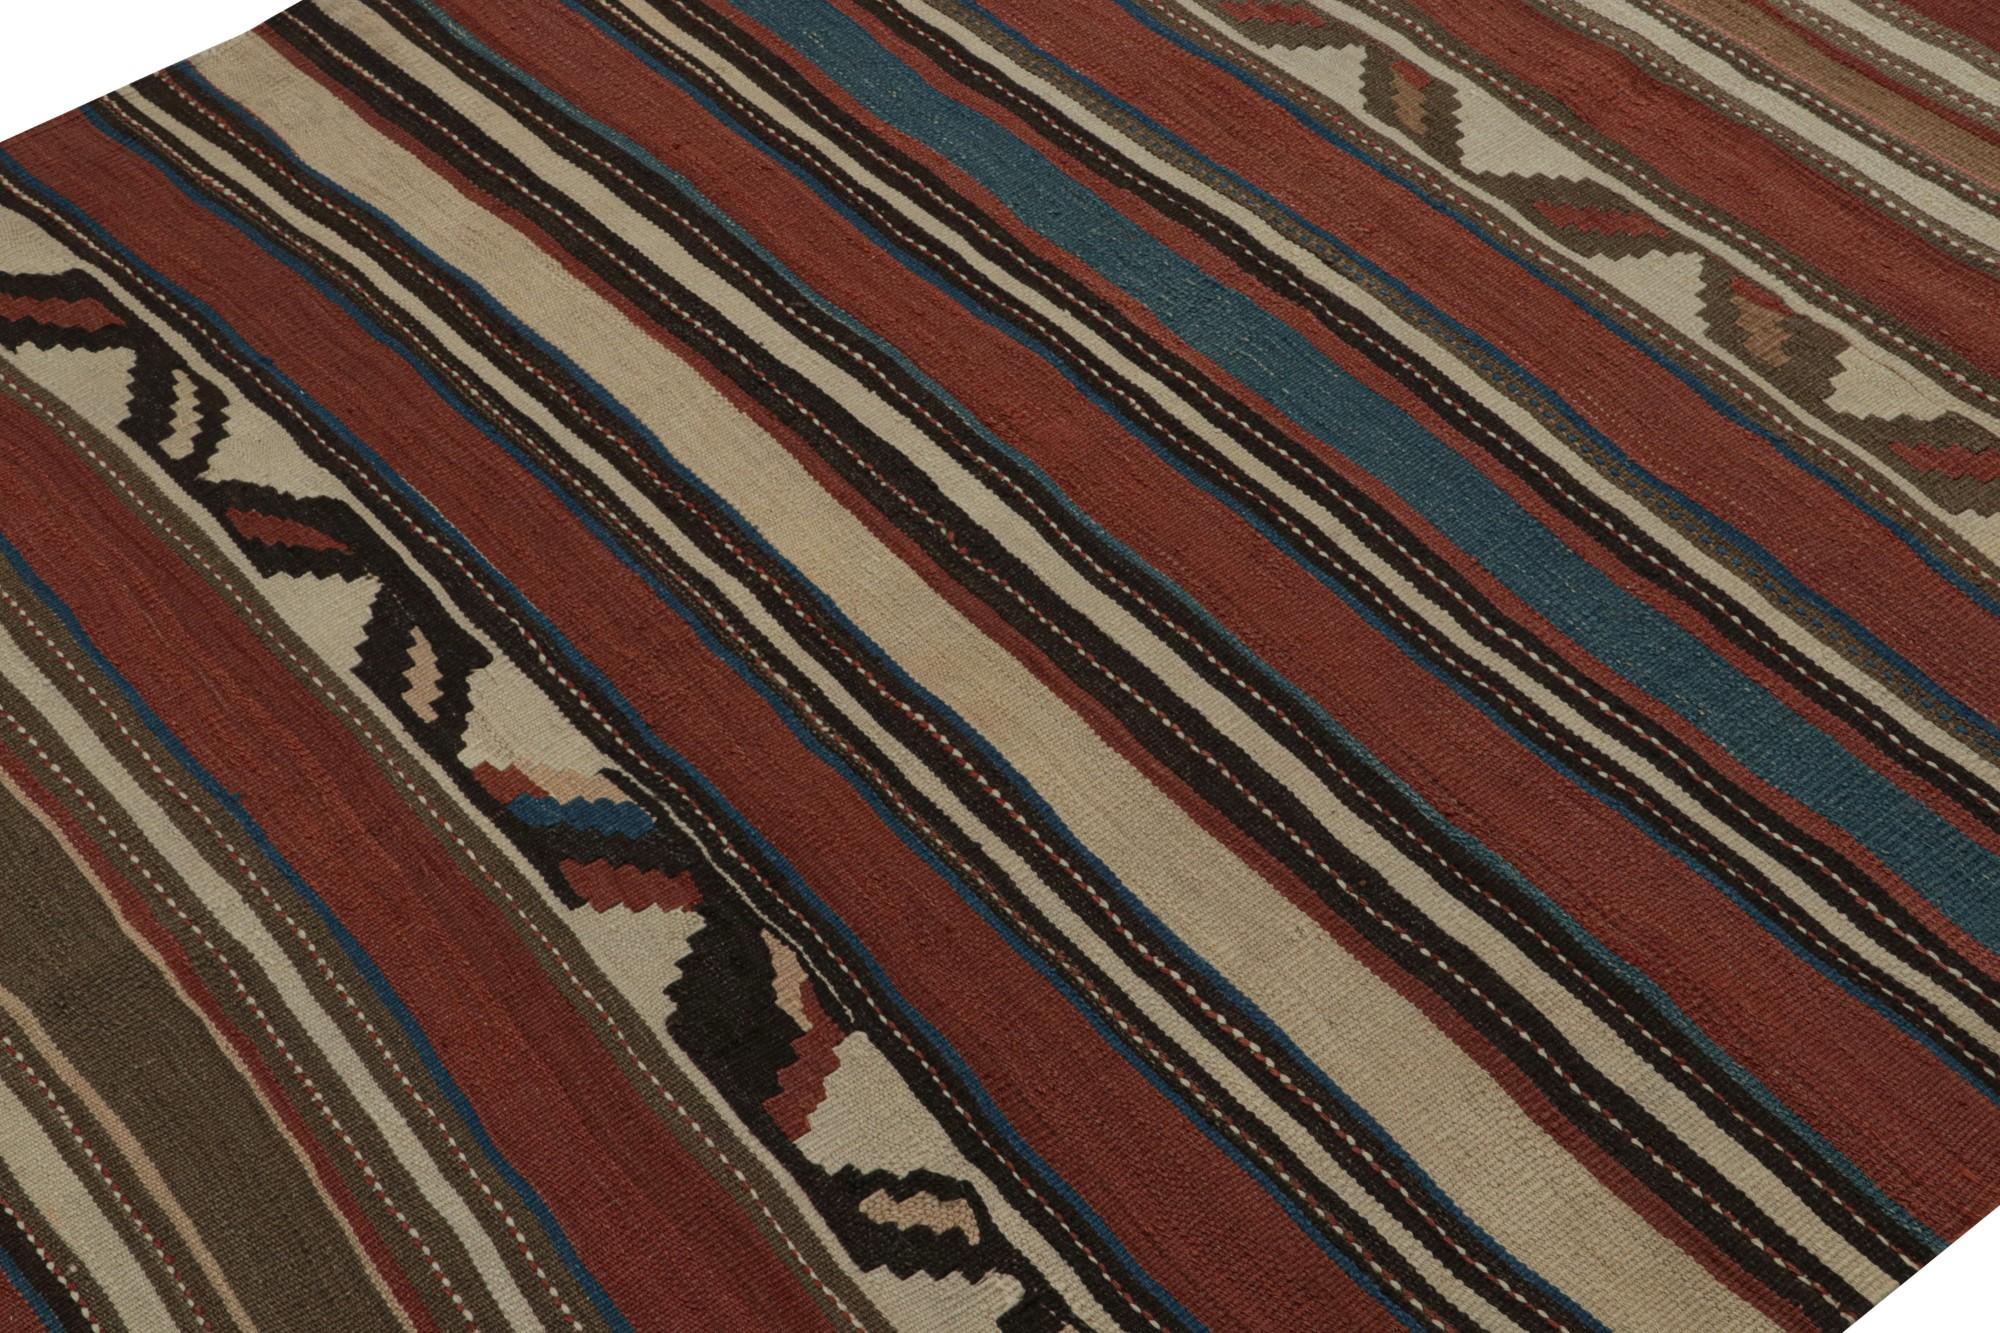 Hand-Woven Vintage Tribal Kilim rug in Polychromatic Geometric Patterns by Rug & Kilim For Sale